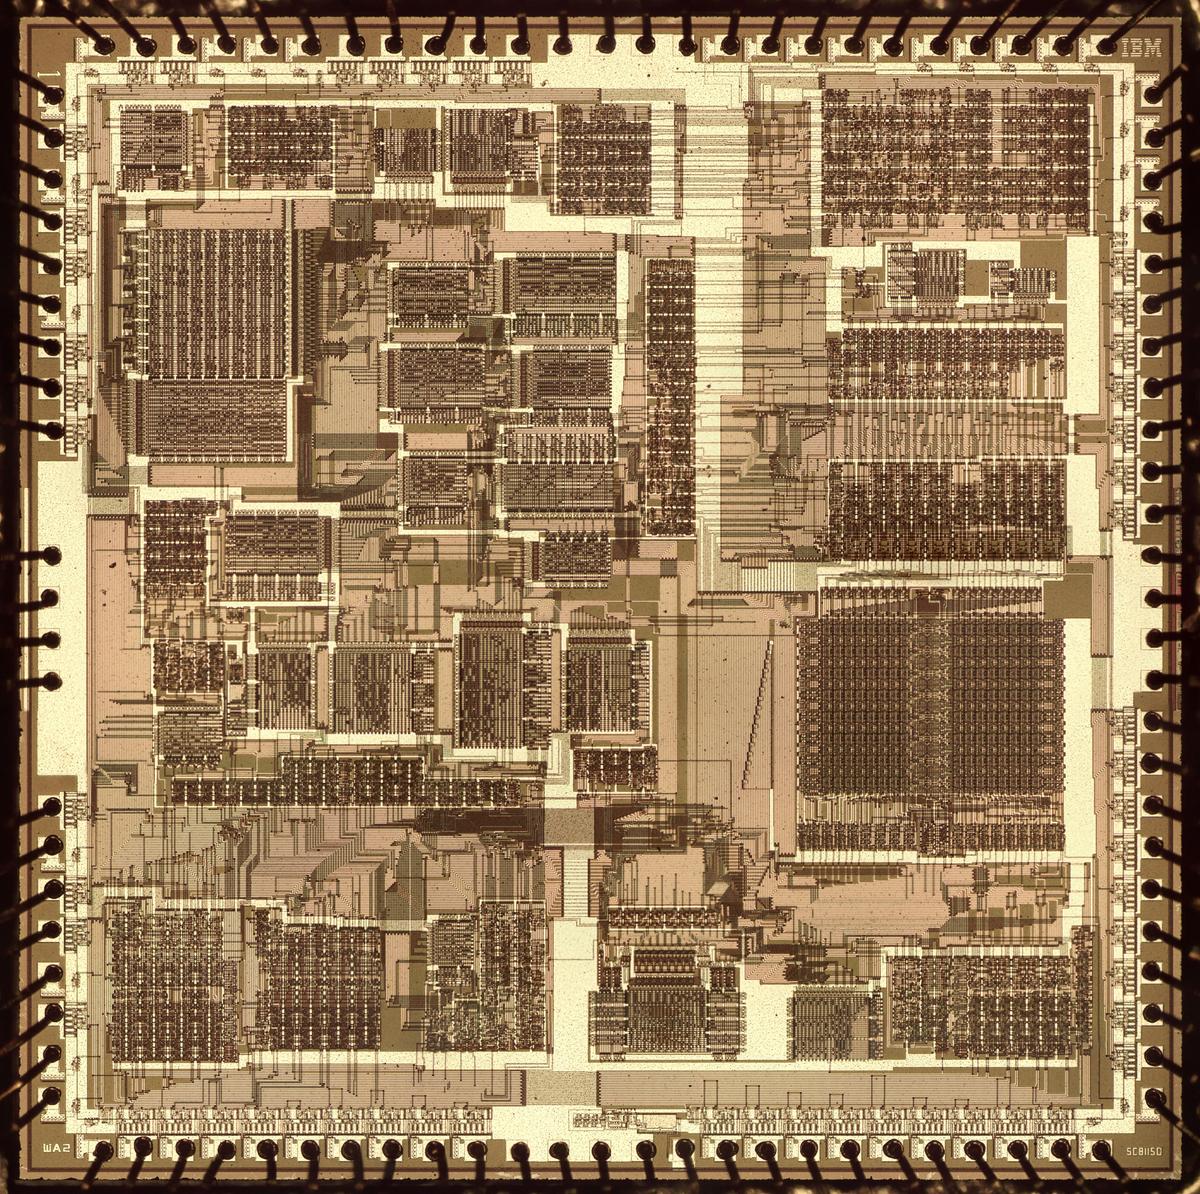 Die photo of the Motorola/IBM SC81150 chip. Click this image (or any other) for a larger version.